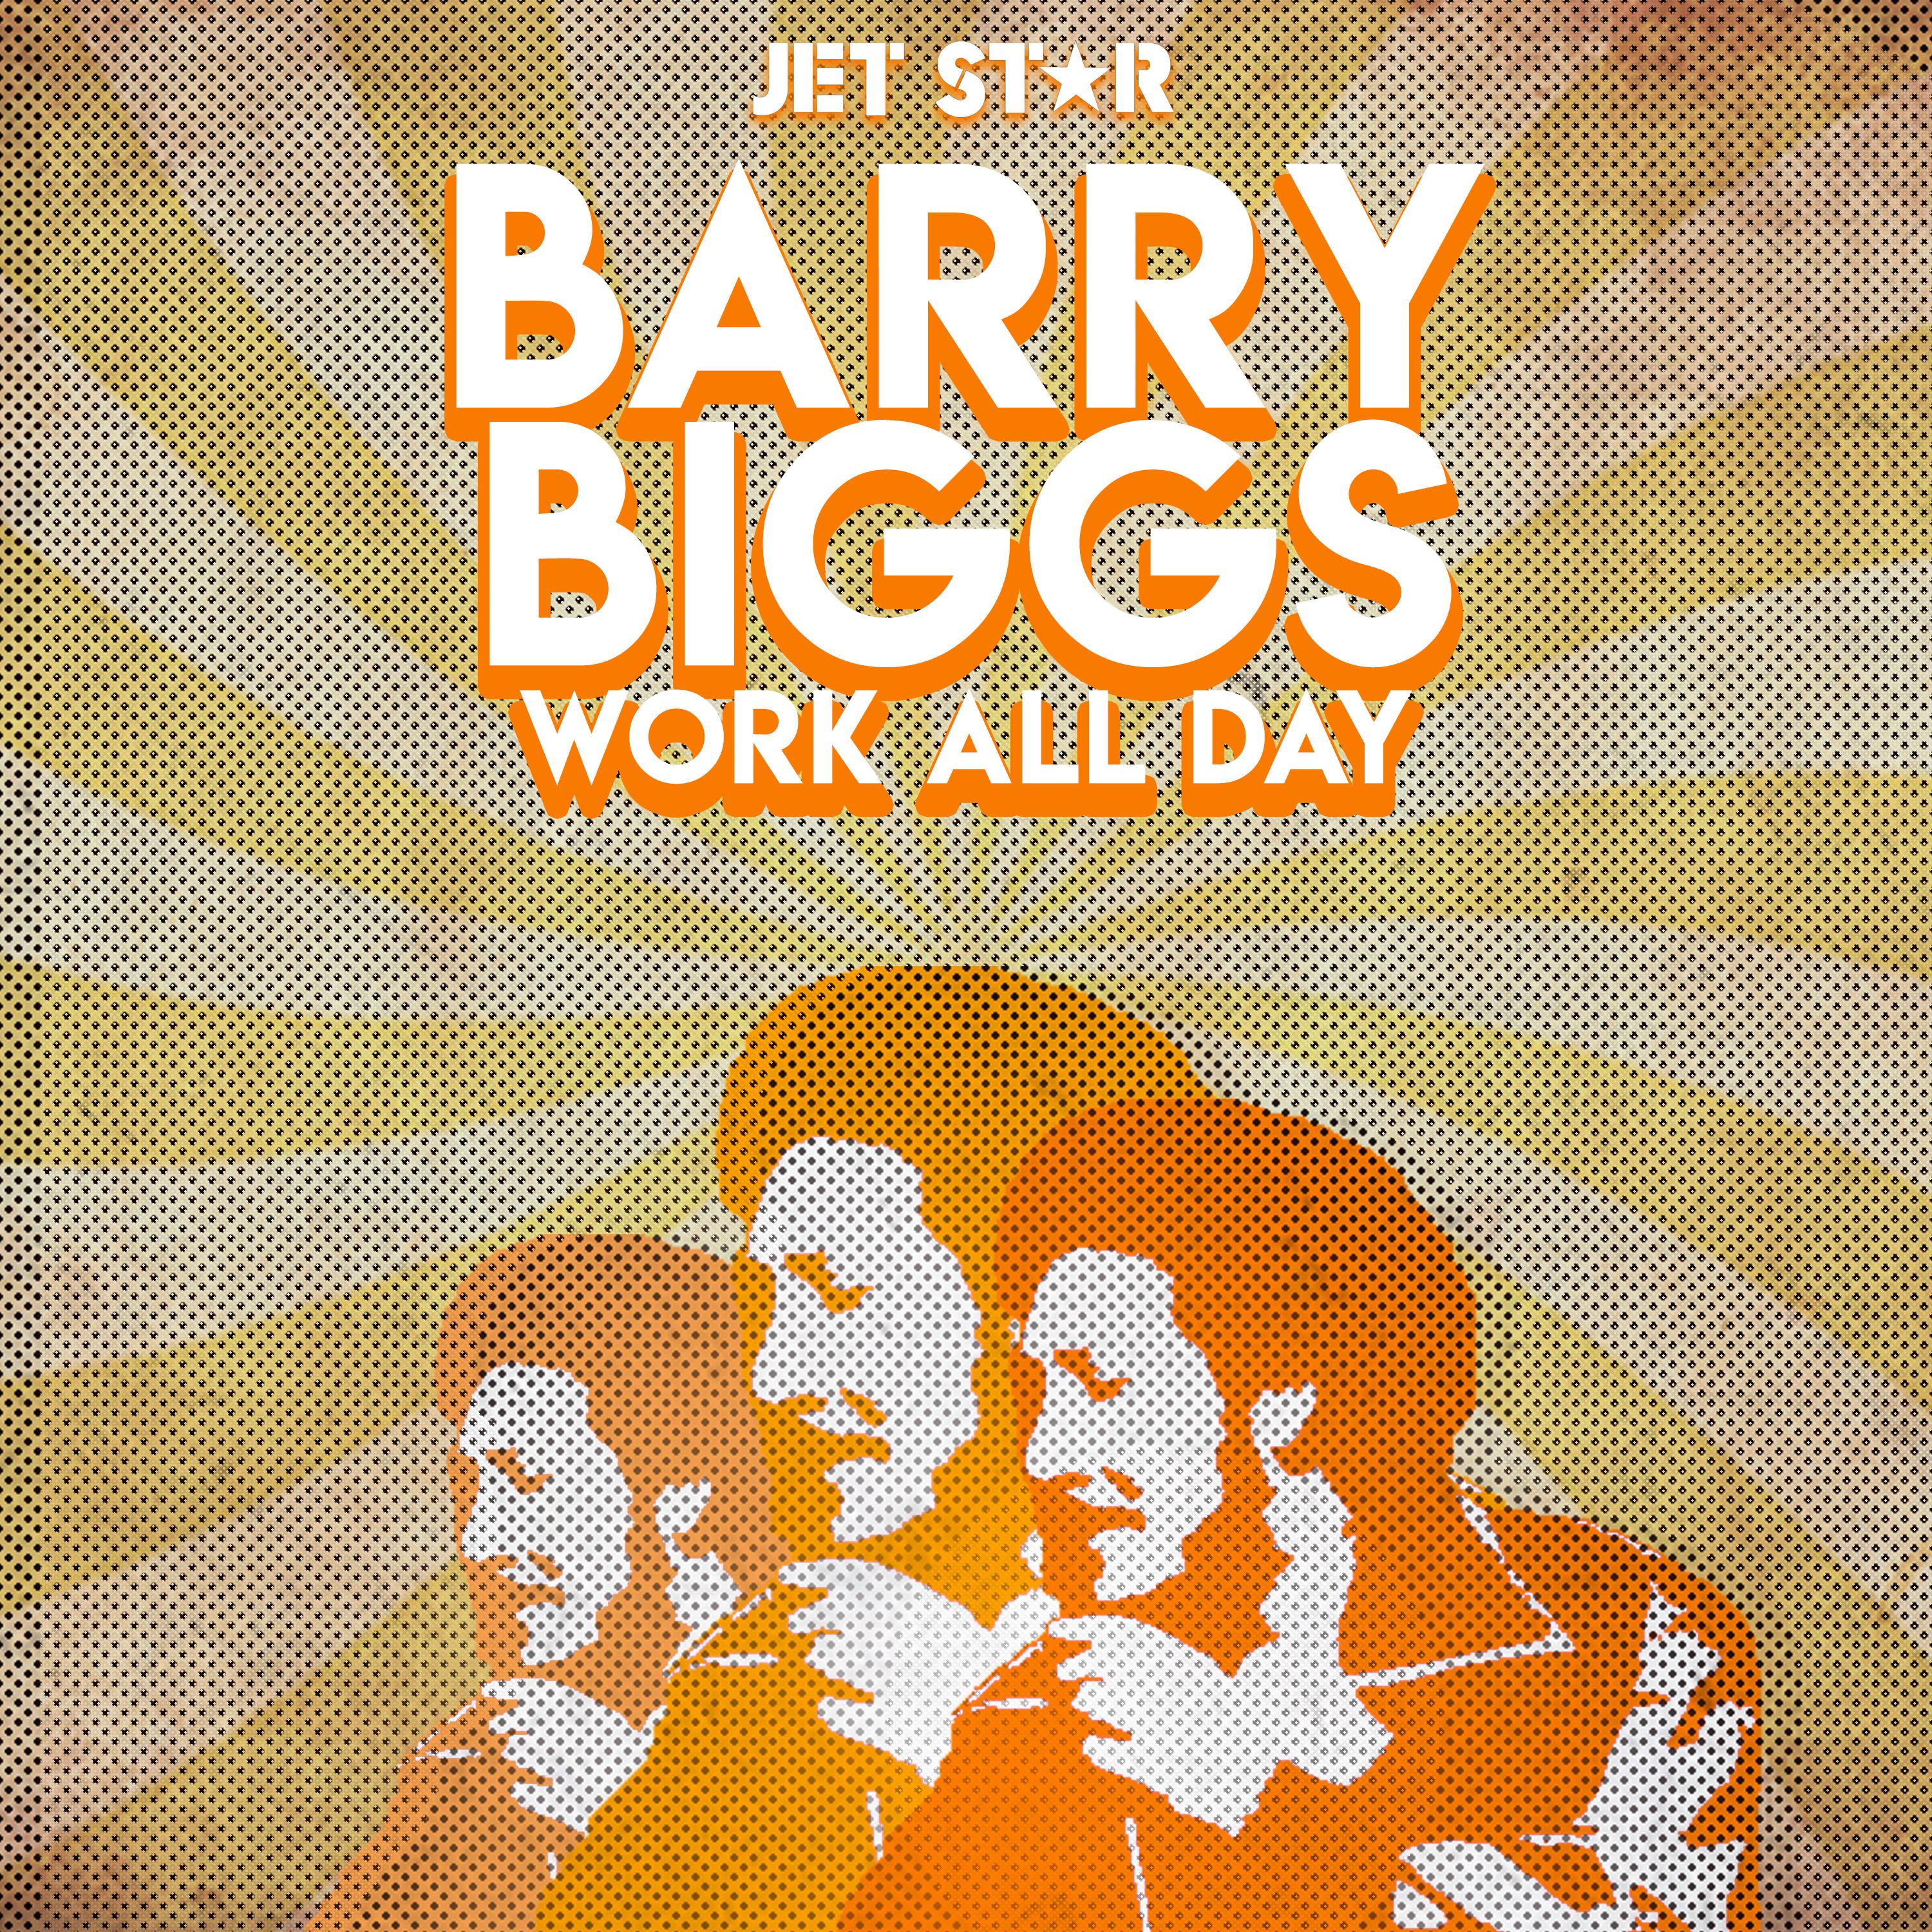 Work All Day - Barry Biggs